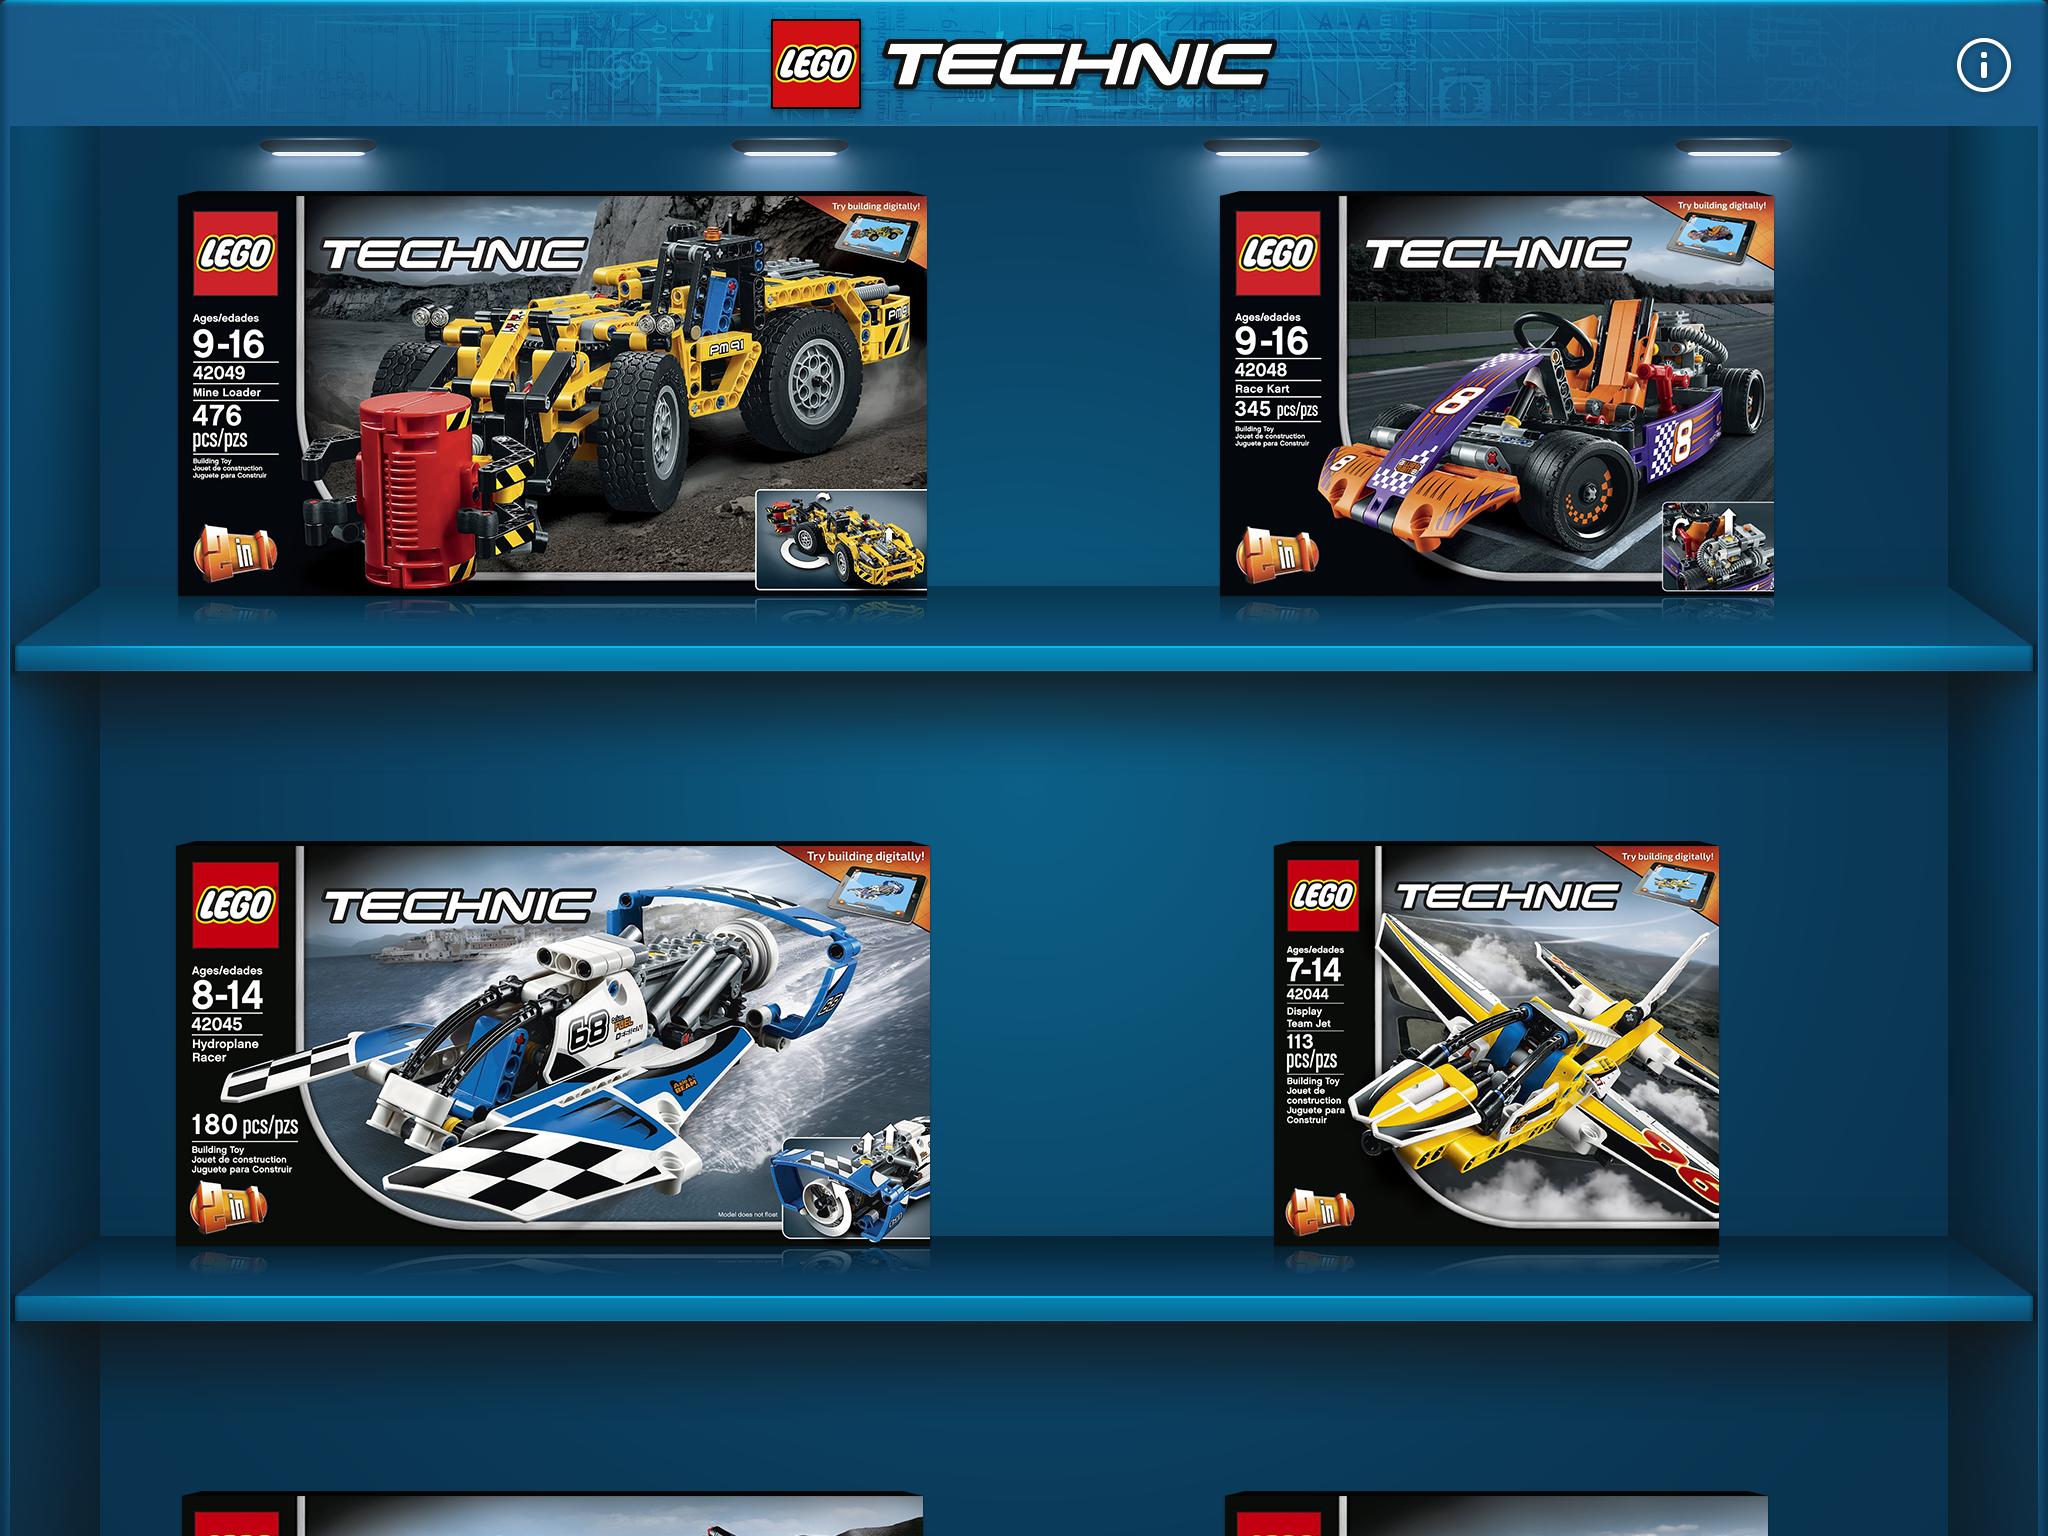 LEGO® Building Instructions for Android - APK Download